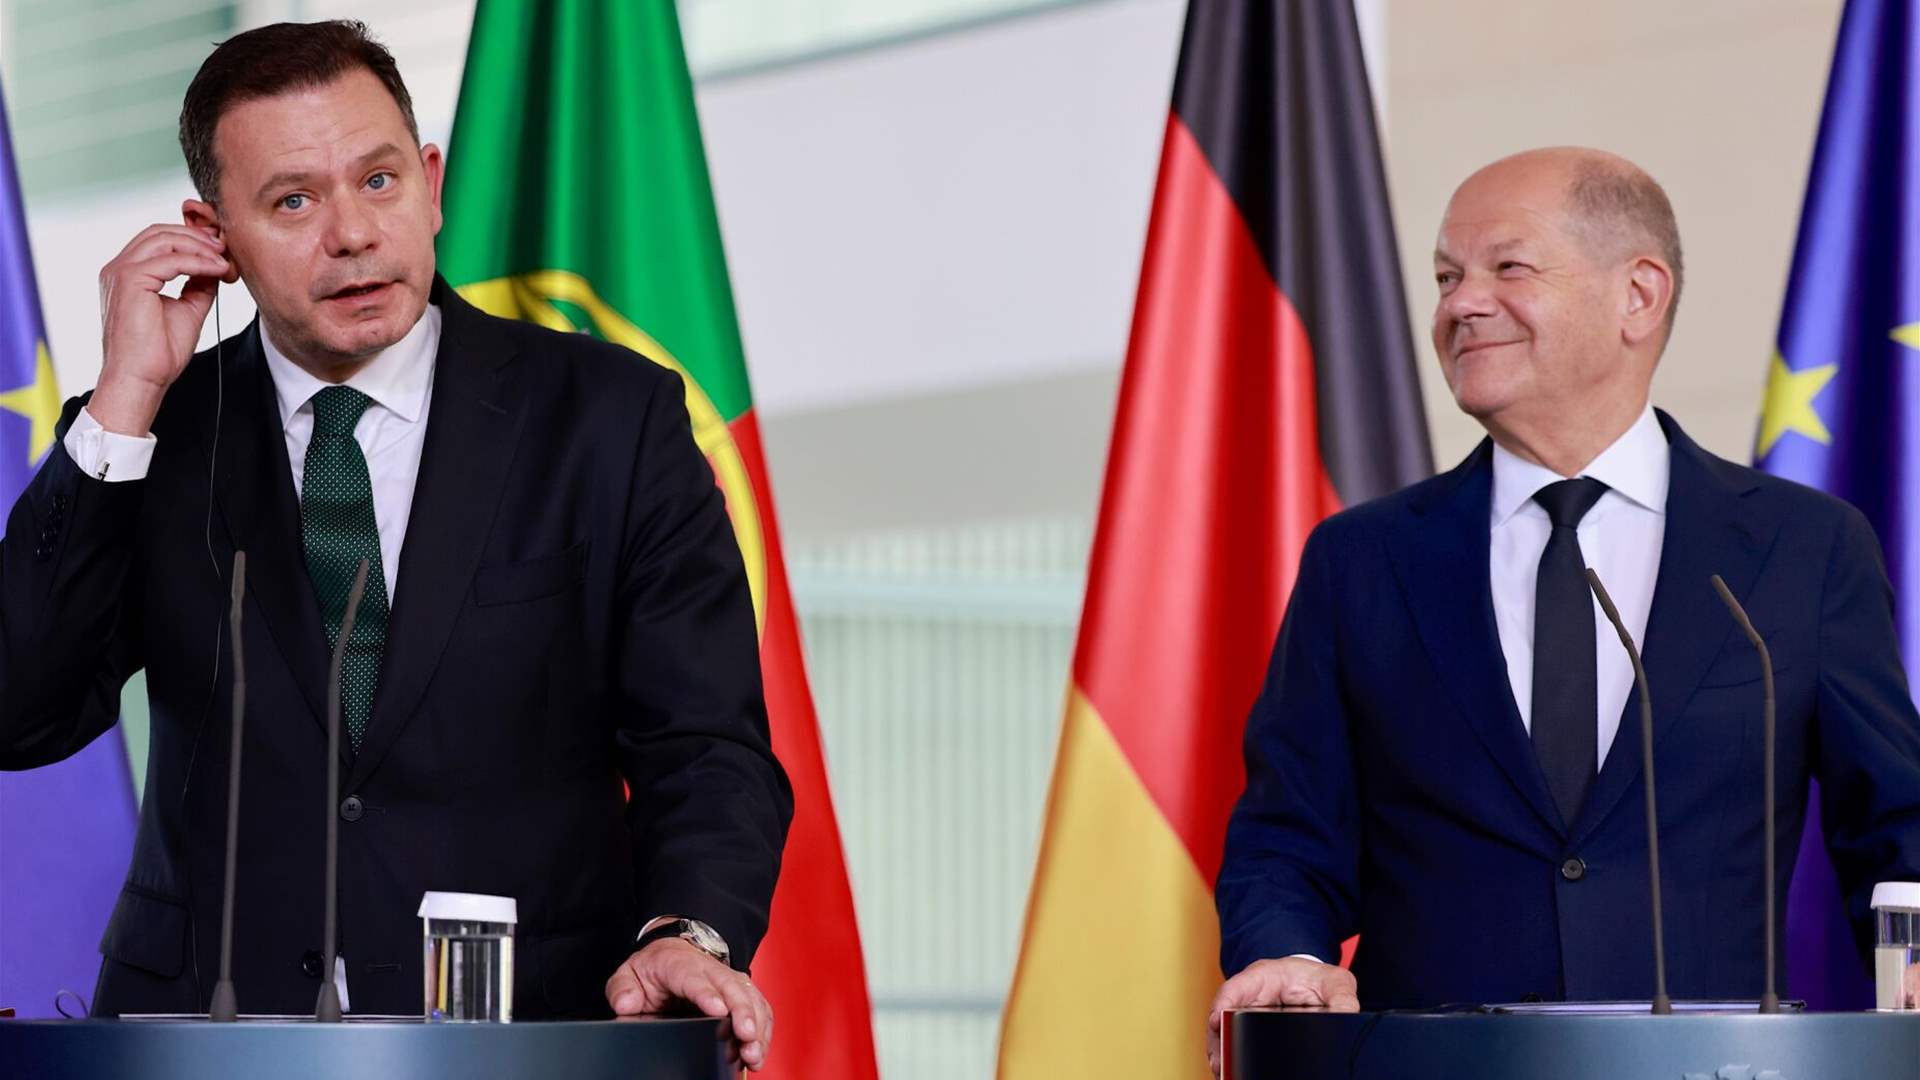 Germany and Portugal consider now is an &quot;inappropriate&quot; time to recognize the State of Palestine